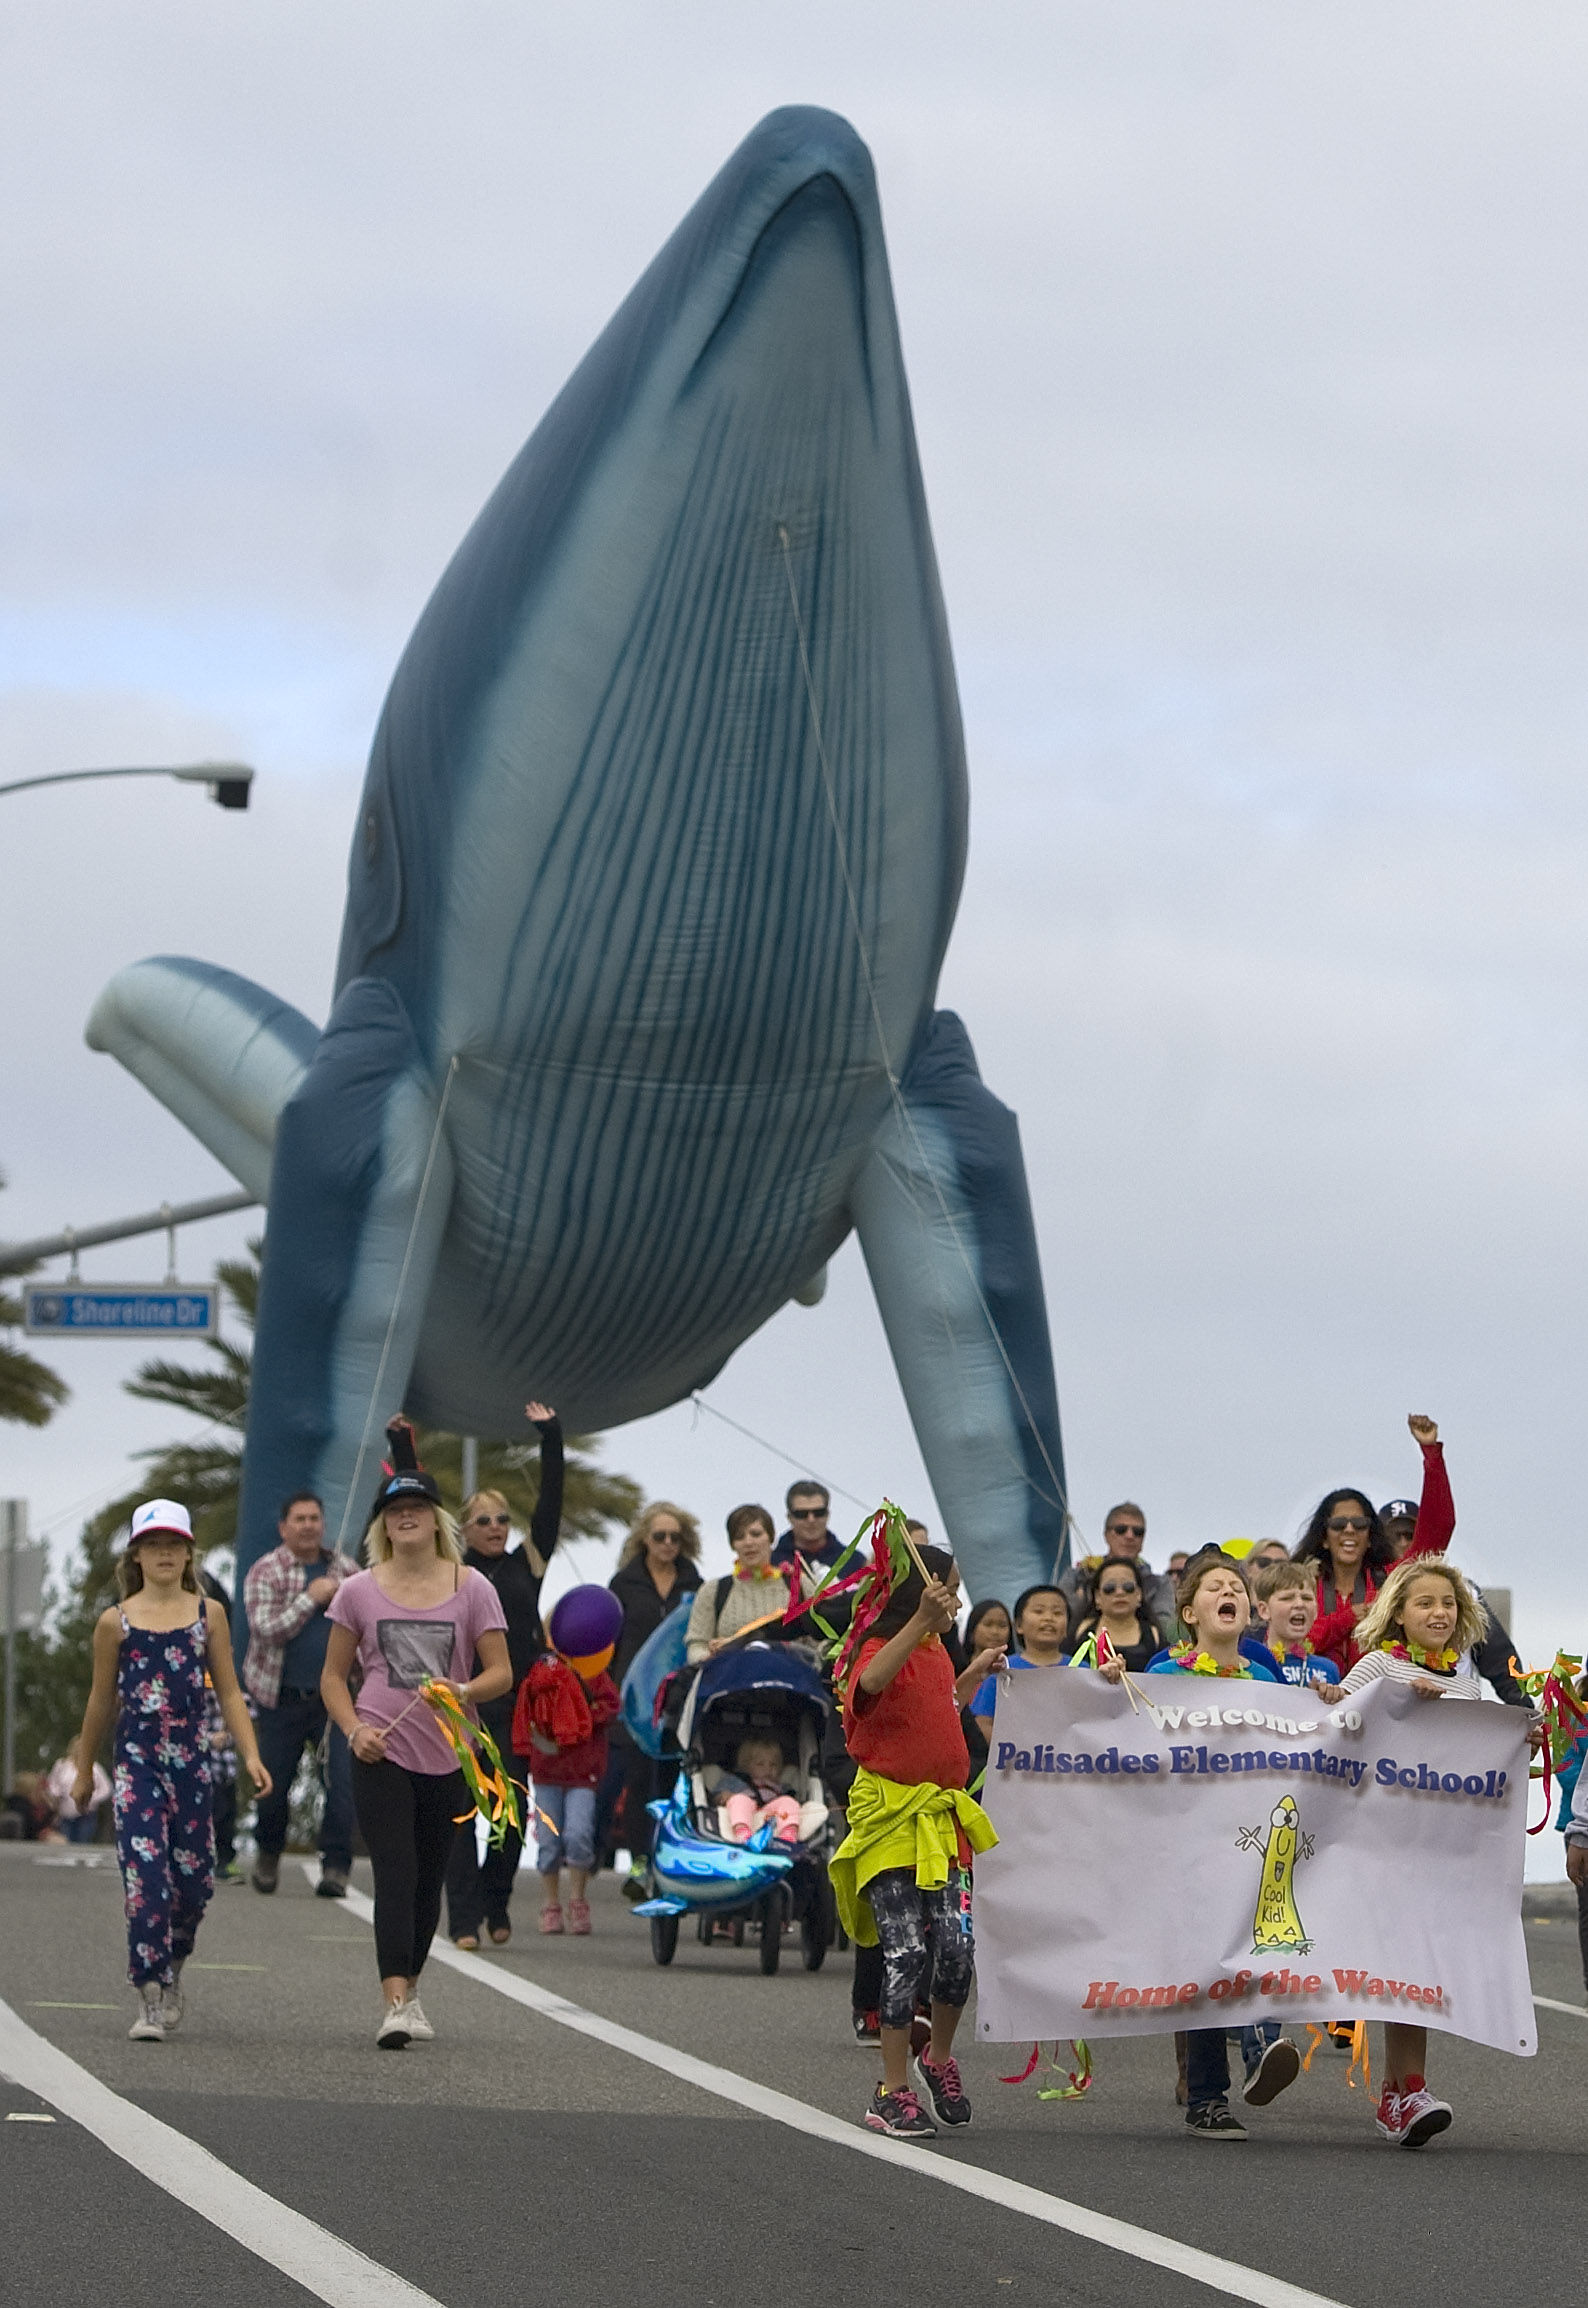 Festival of Whales opens Saturday for two weekends in Dana Point Pure